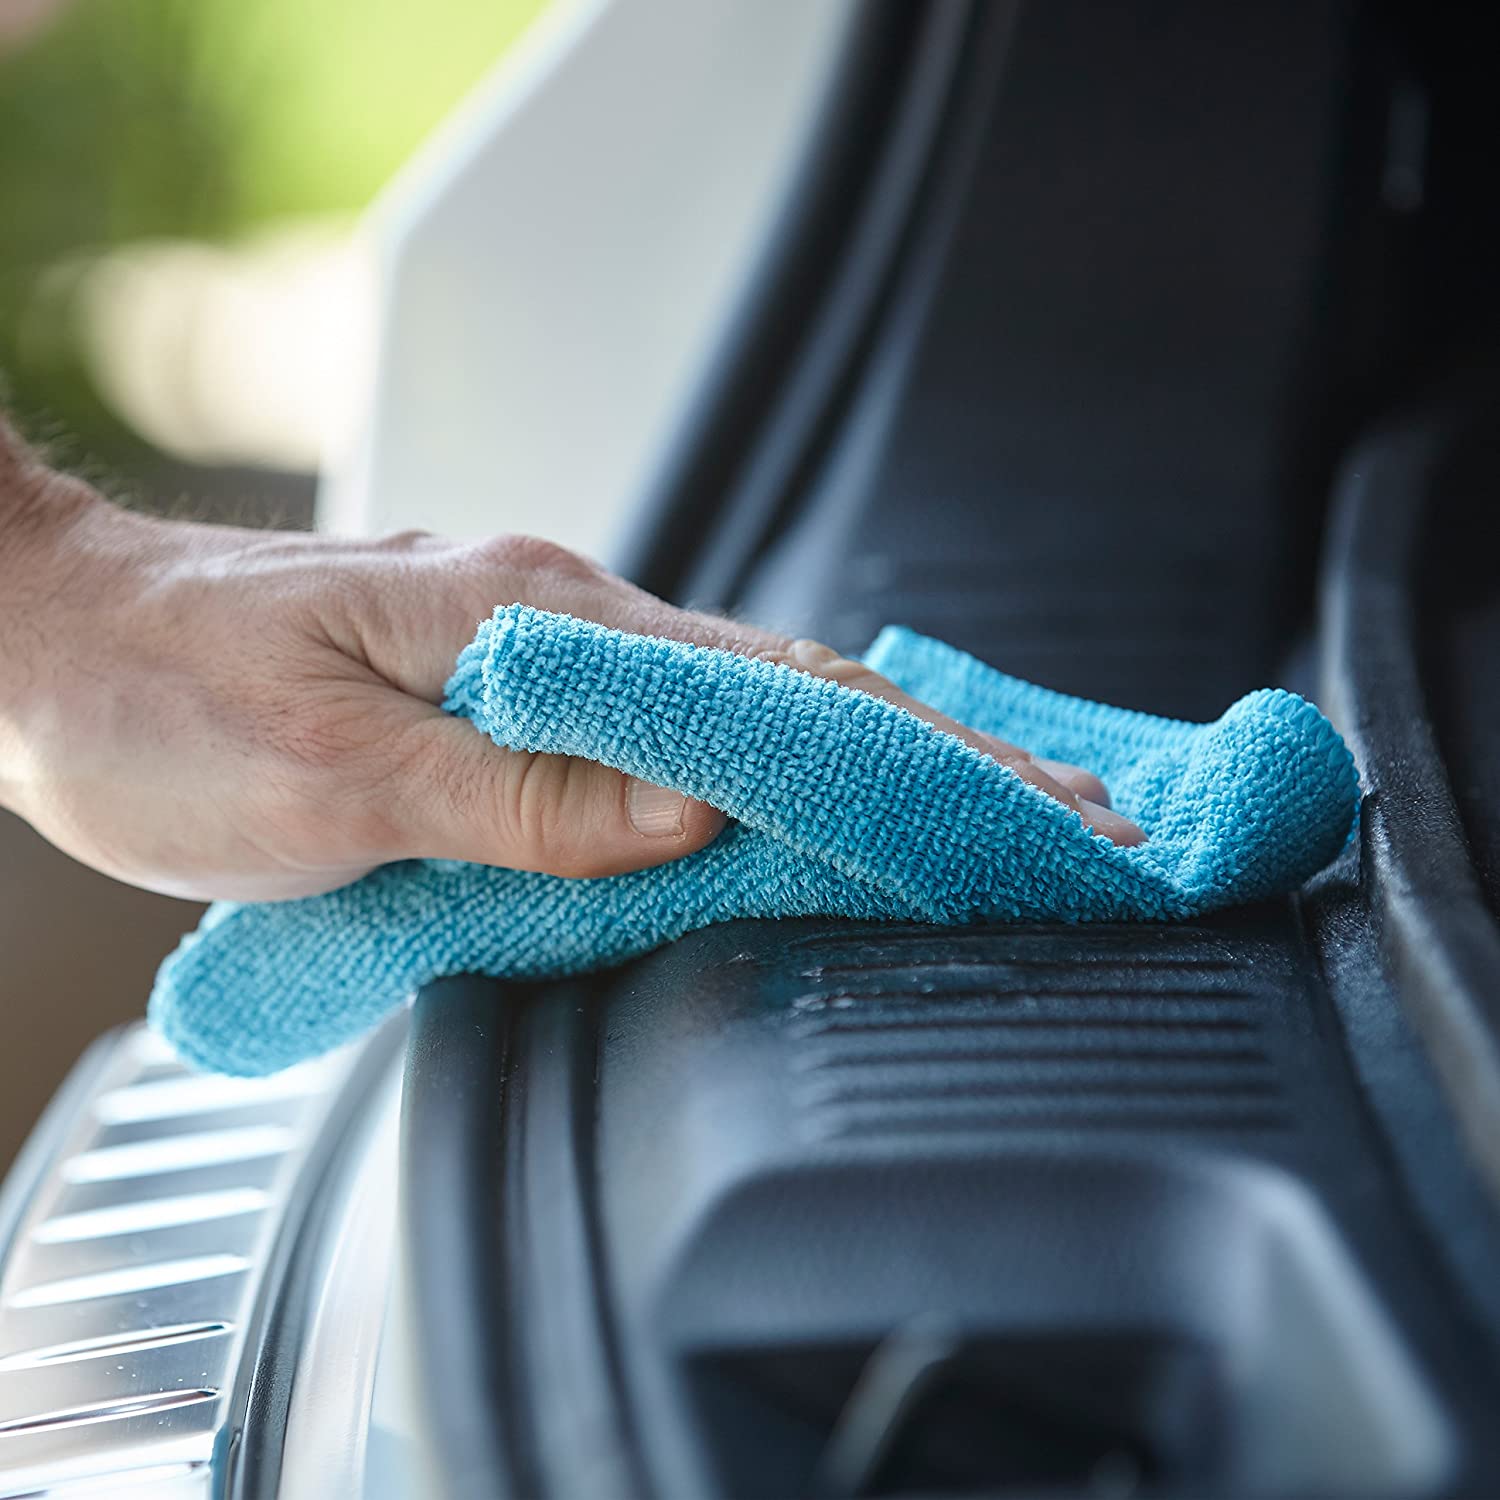 What are the differences between car wash towels and regular towels?